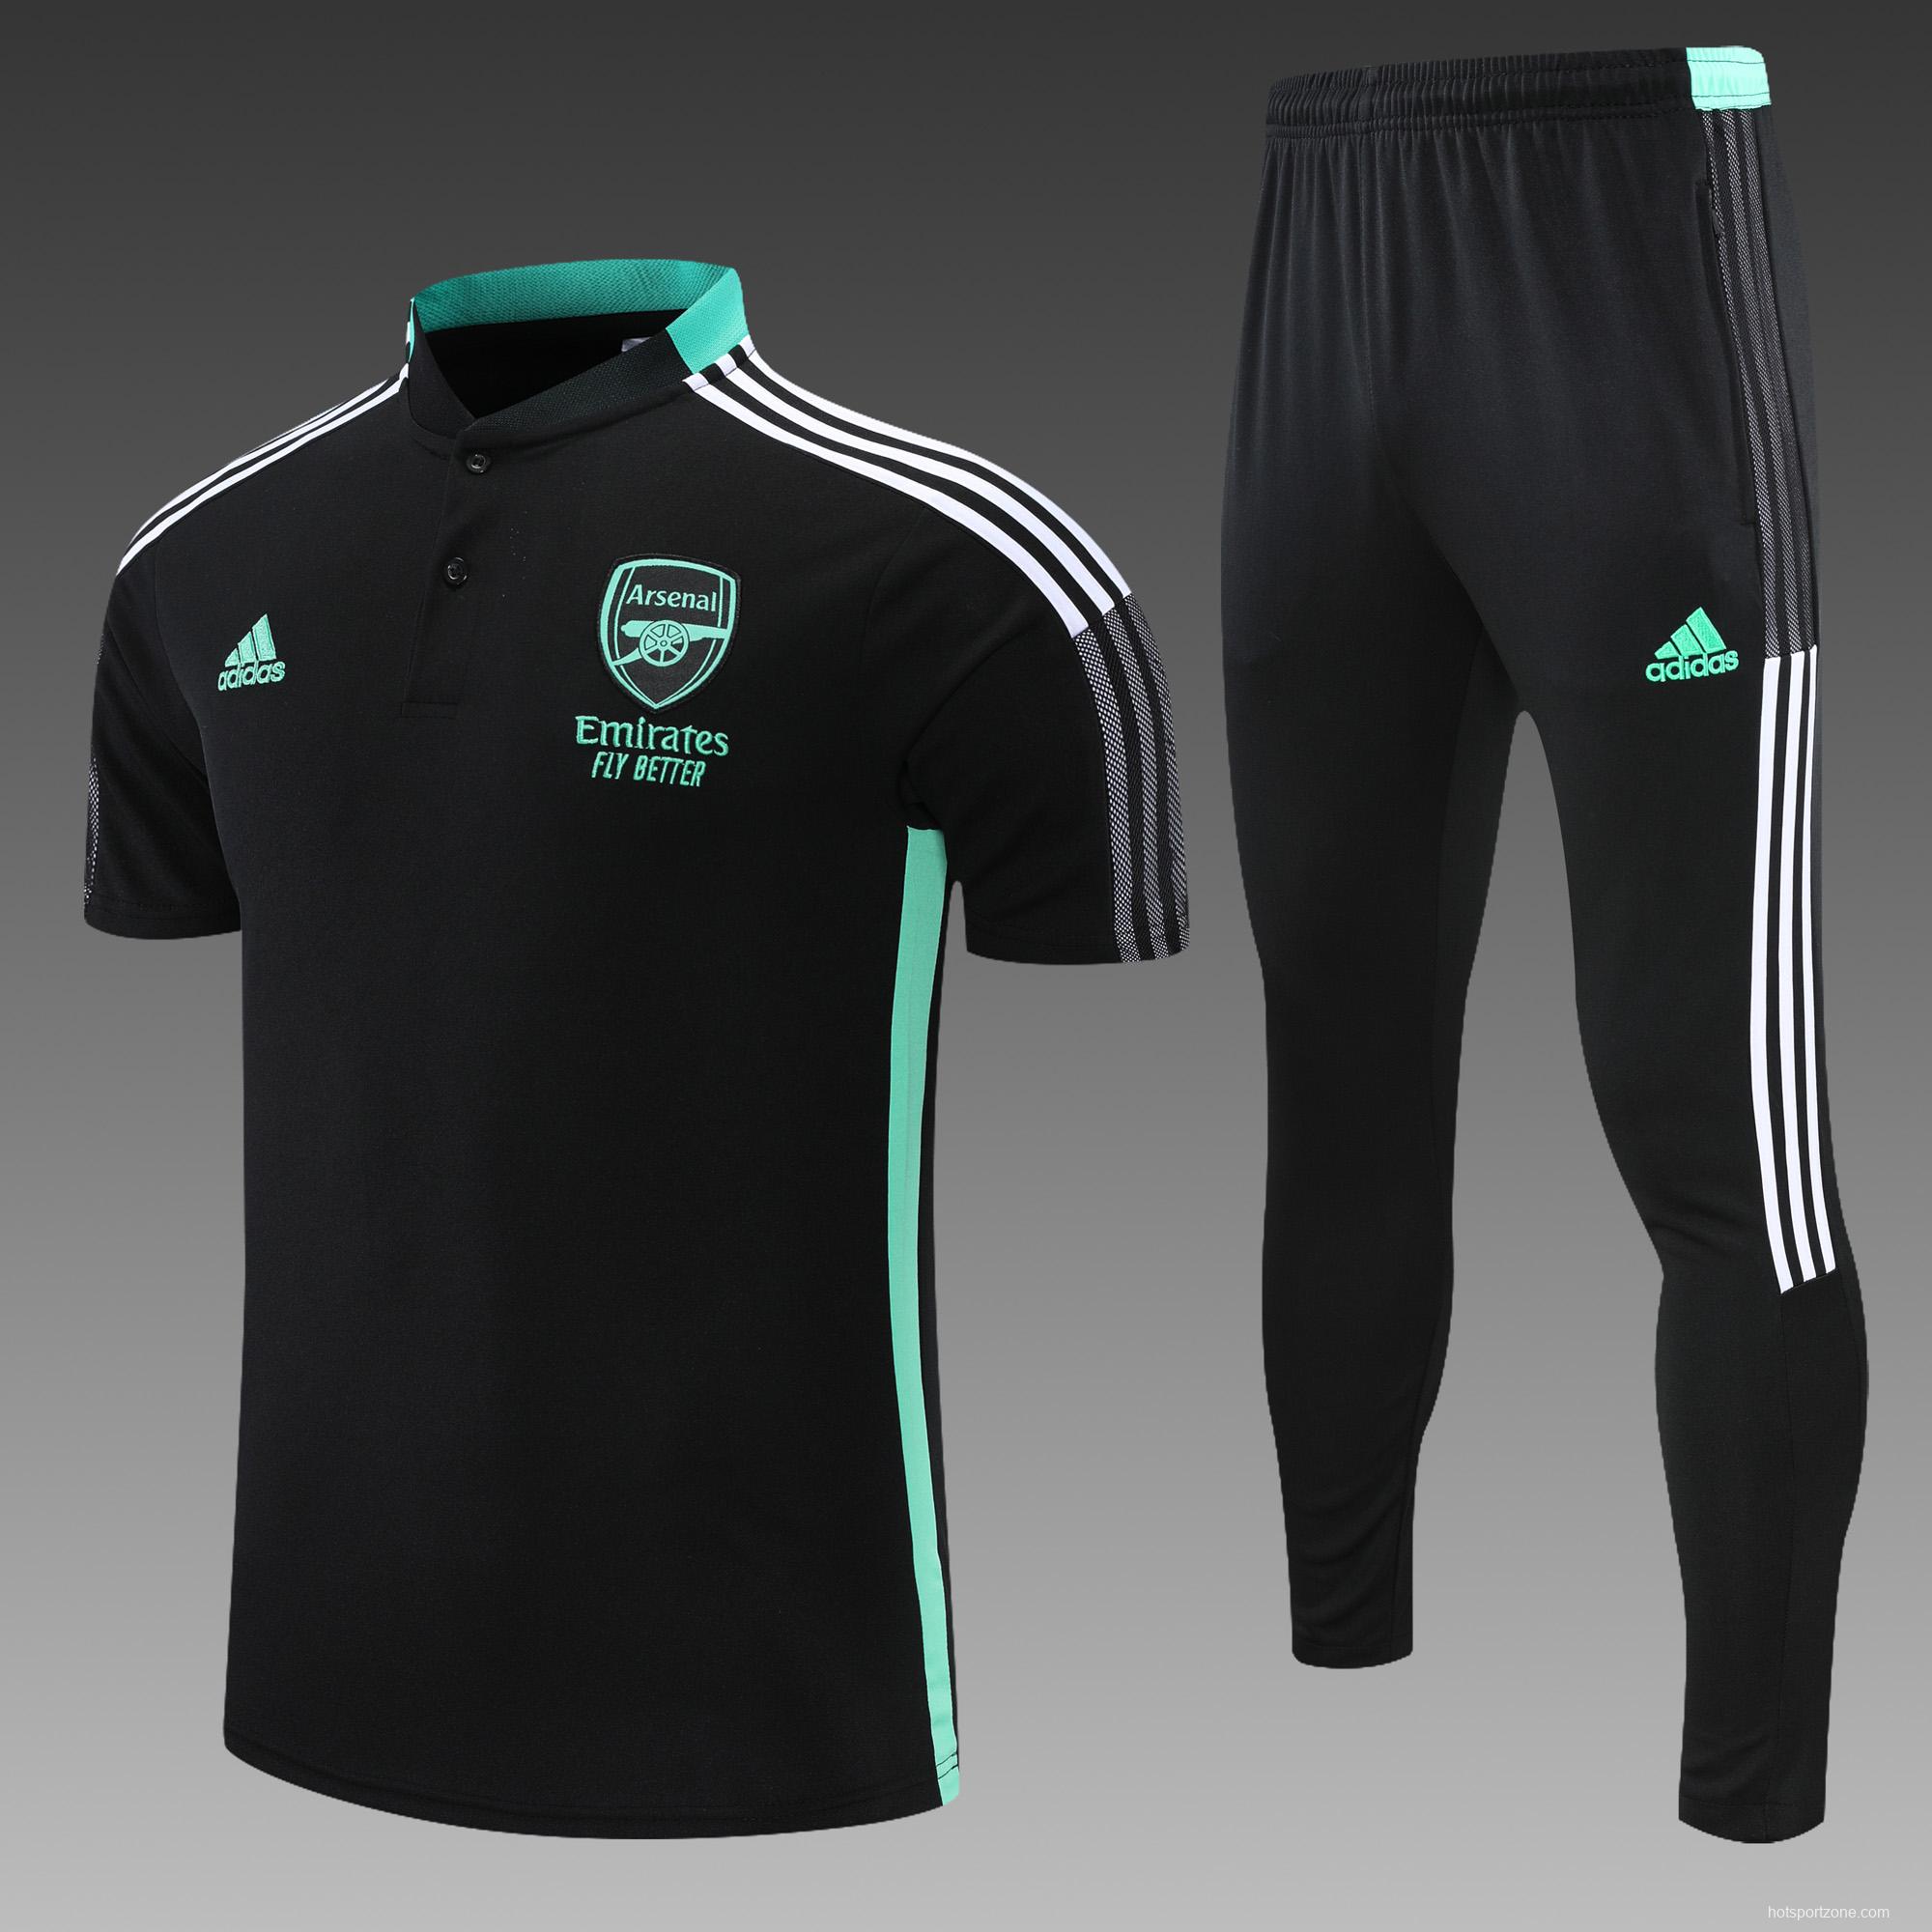 Arsenal POLO kit Black (not supported to be sold separately)